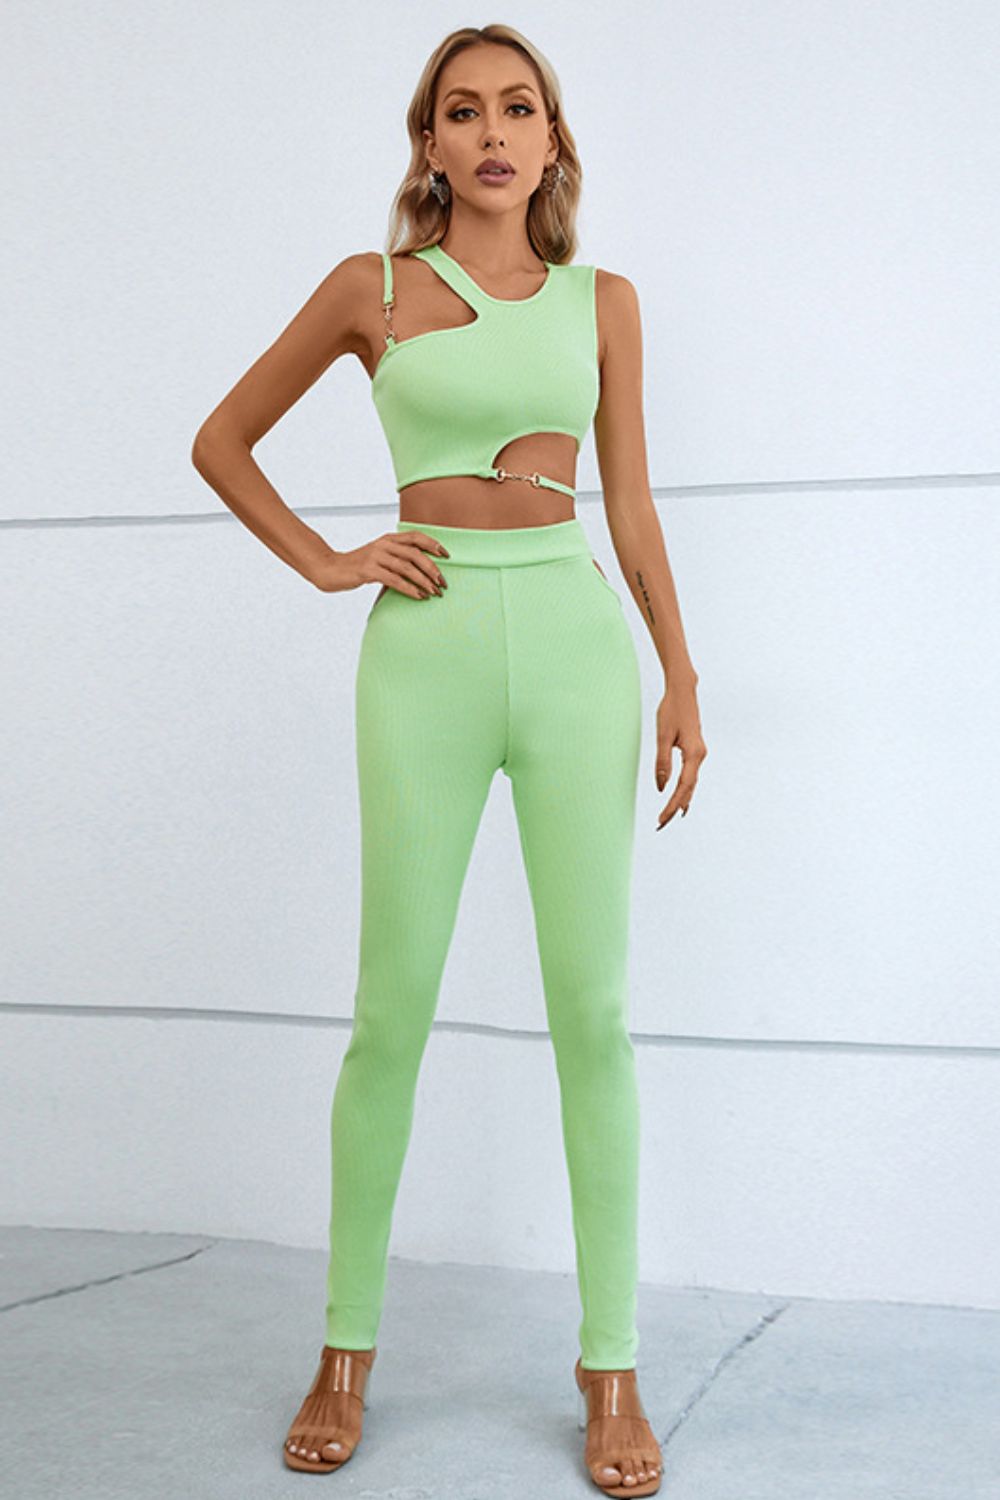 Outfit Set Women's Fashion Asymmetrical Ribbed Cutout Crop top and Leggings Pants Matching Set